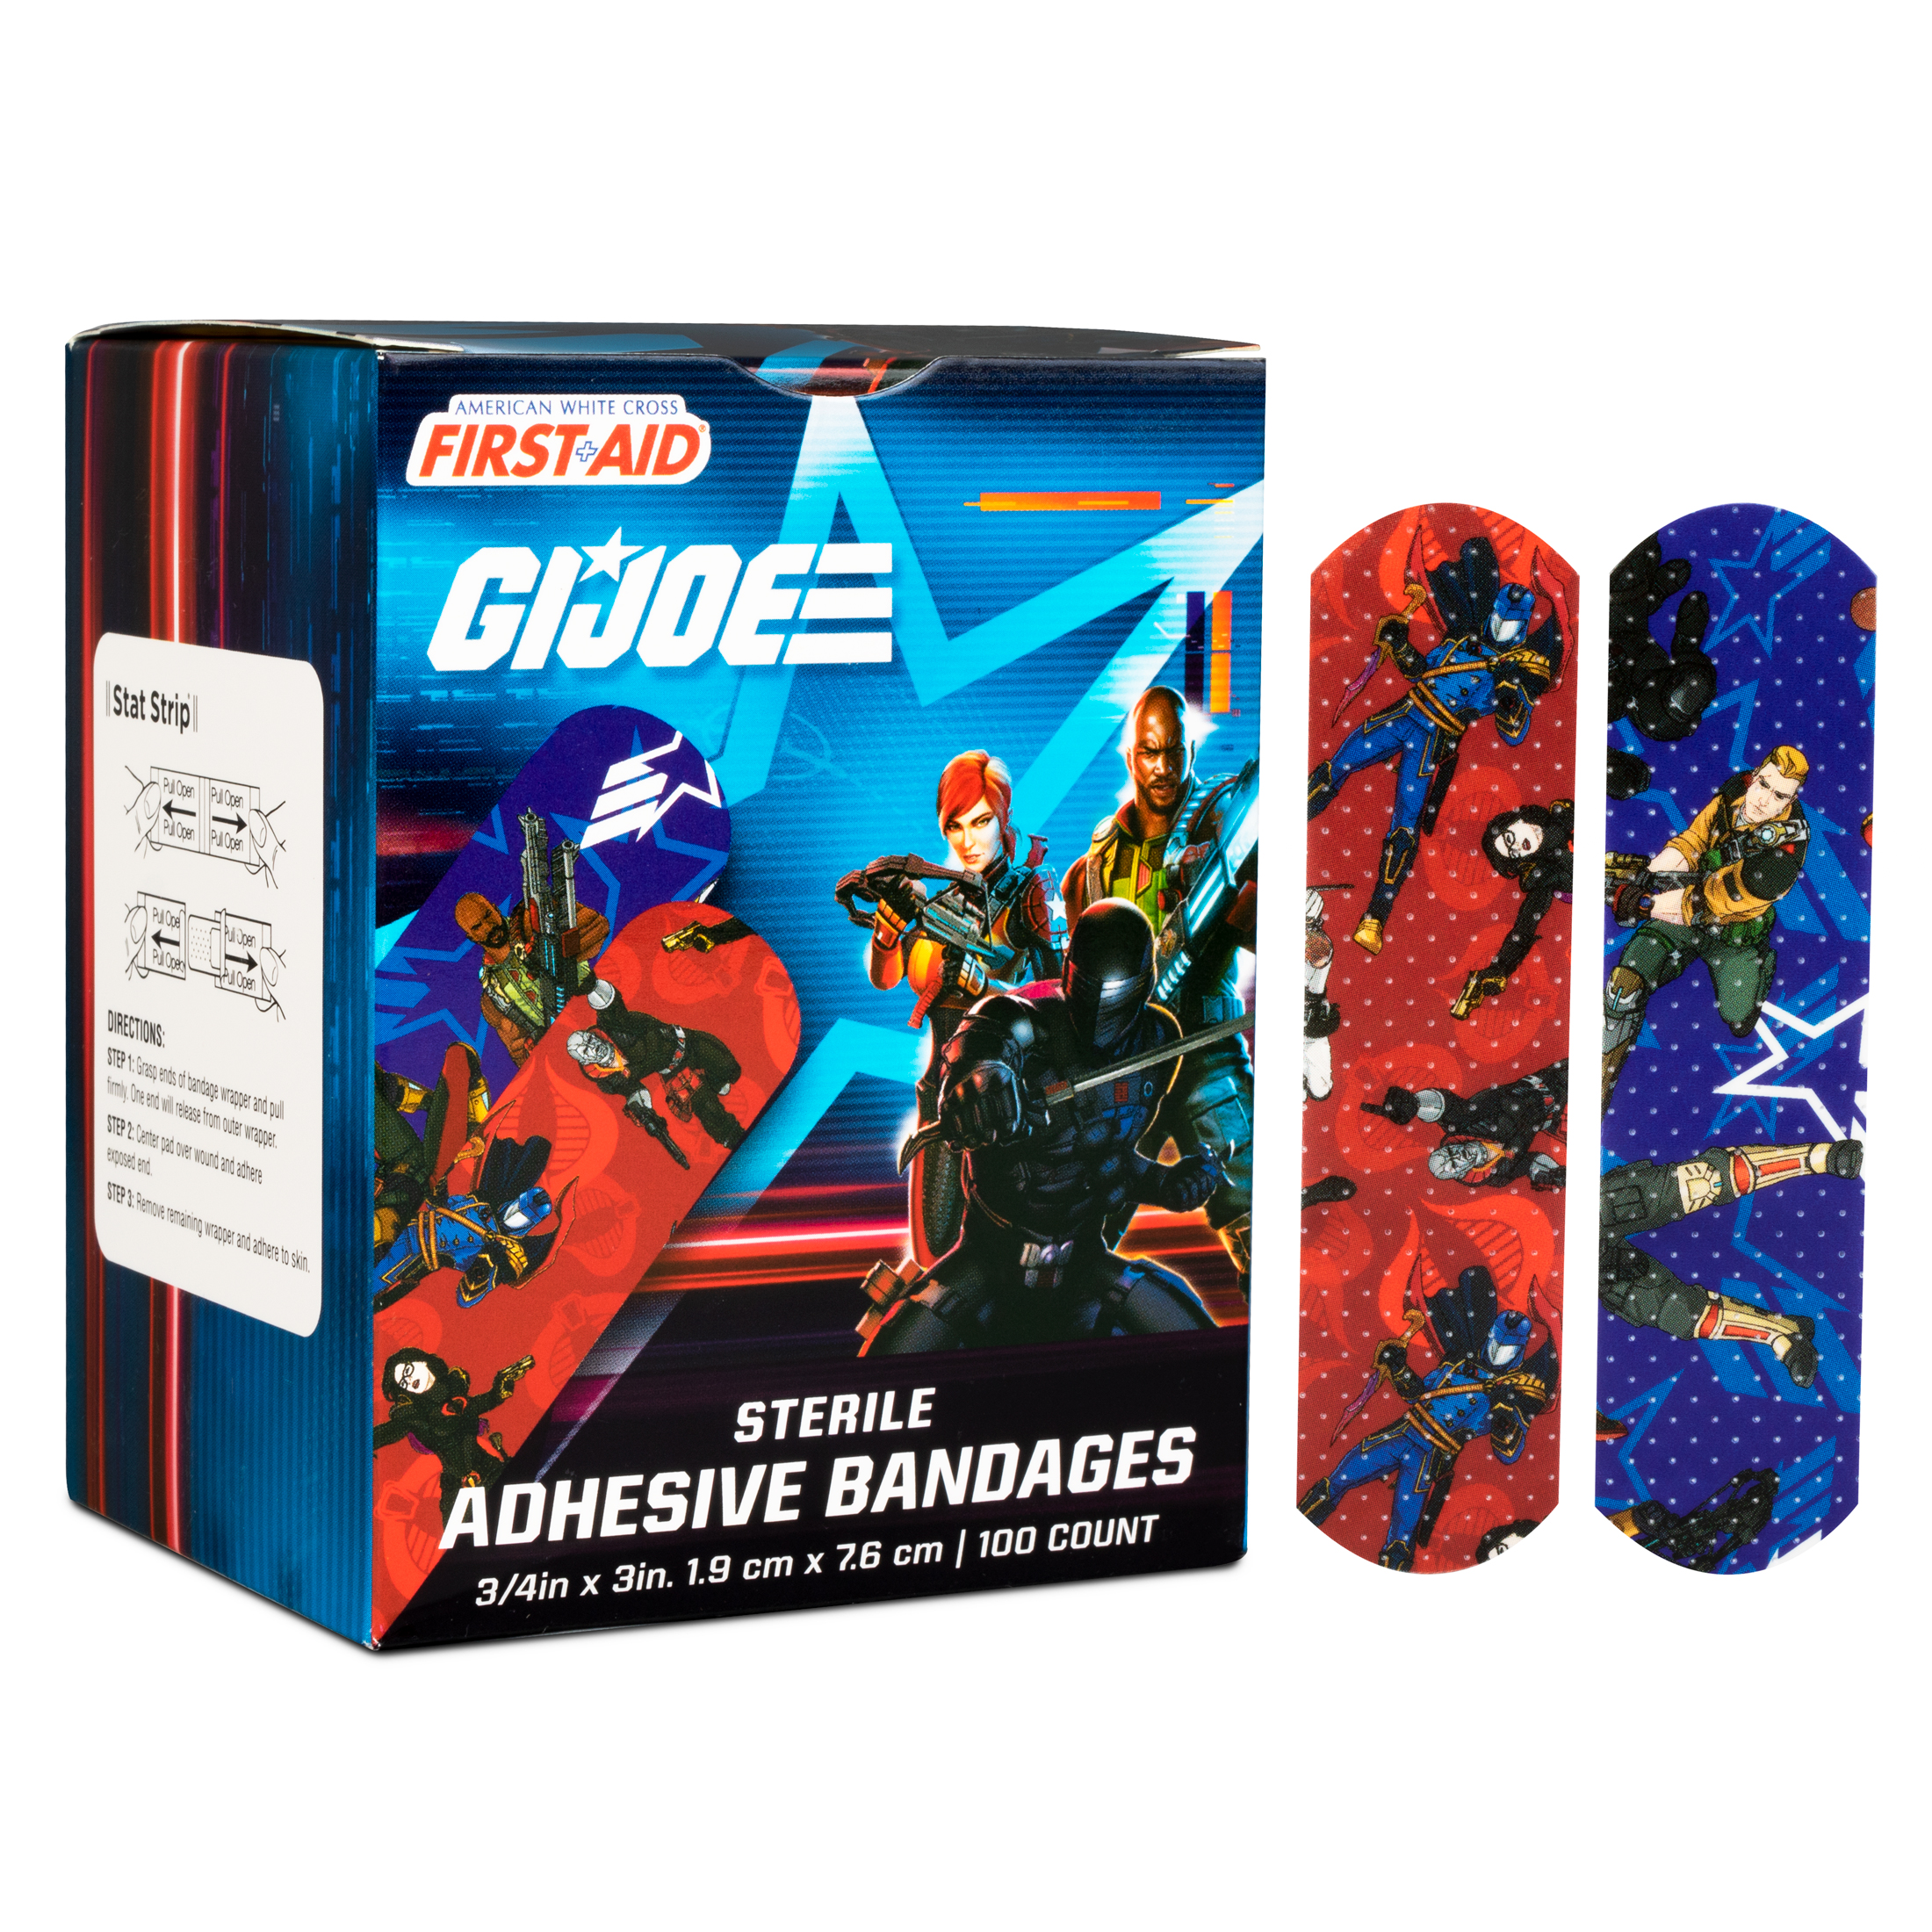 Kids Adhesive Bandages Products, Supplies and Equipment